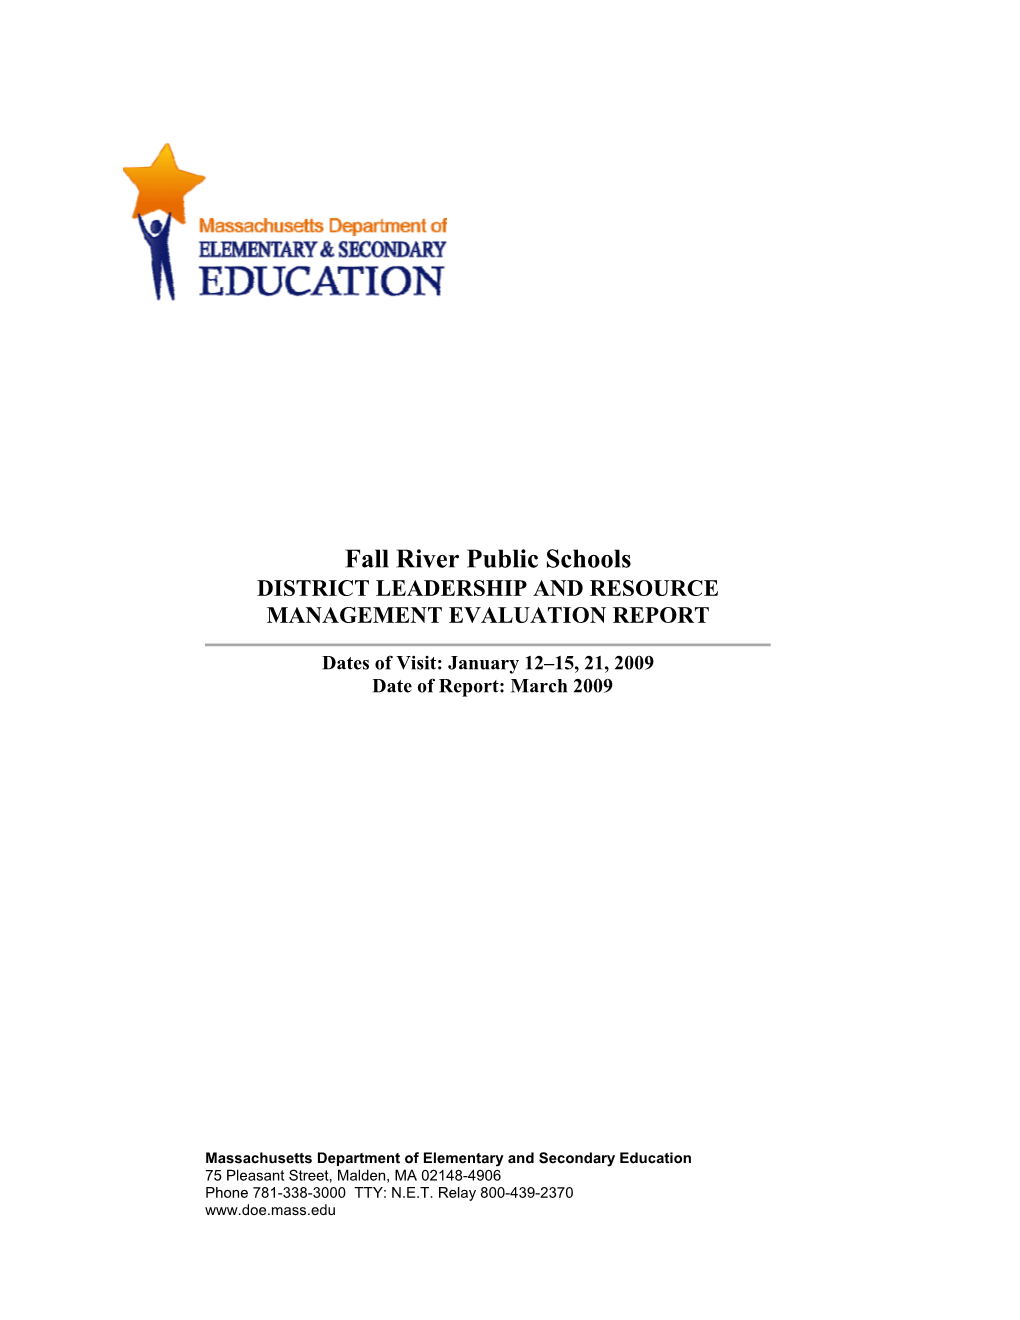 Fall River Public Schools DISTRICT LEADERSHIP and RESOURCE MANAGEMENT EVALUATION REPORT